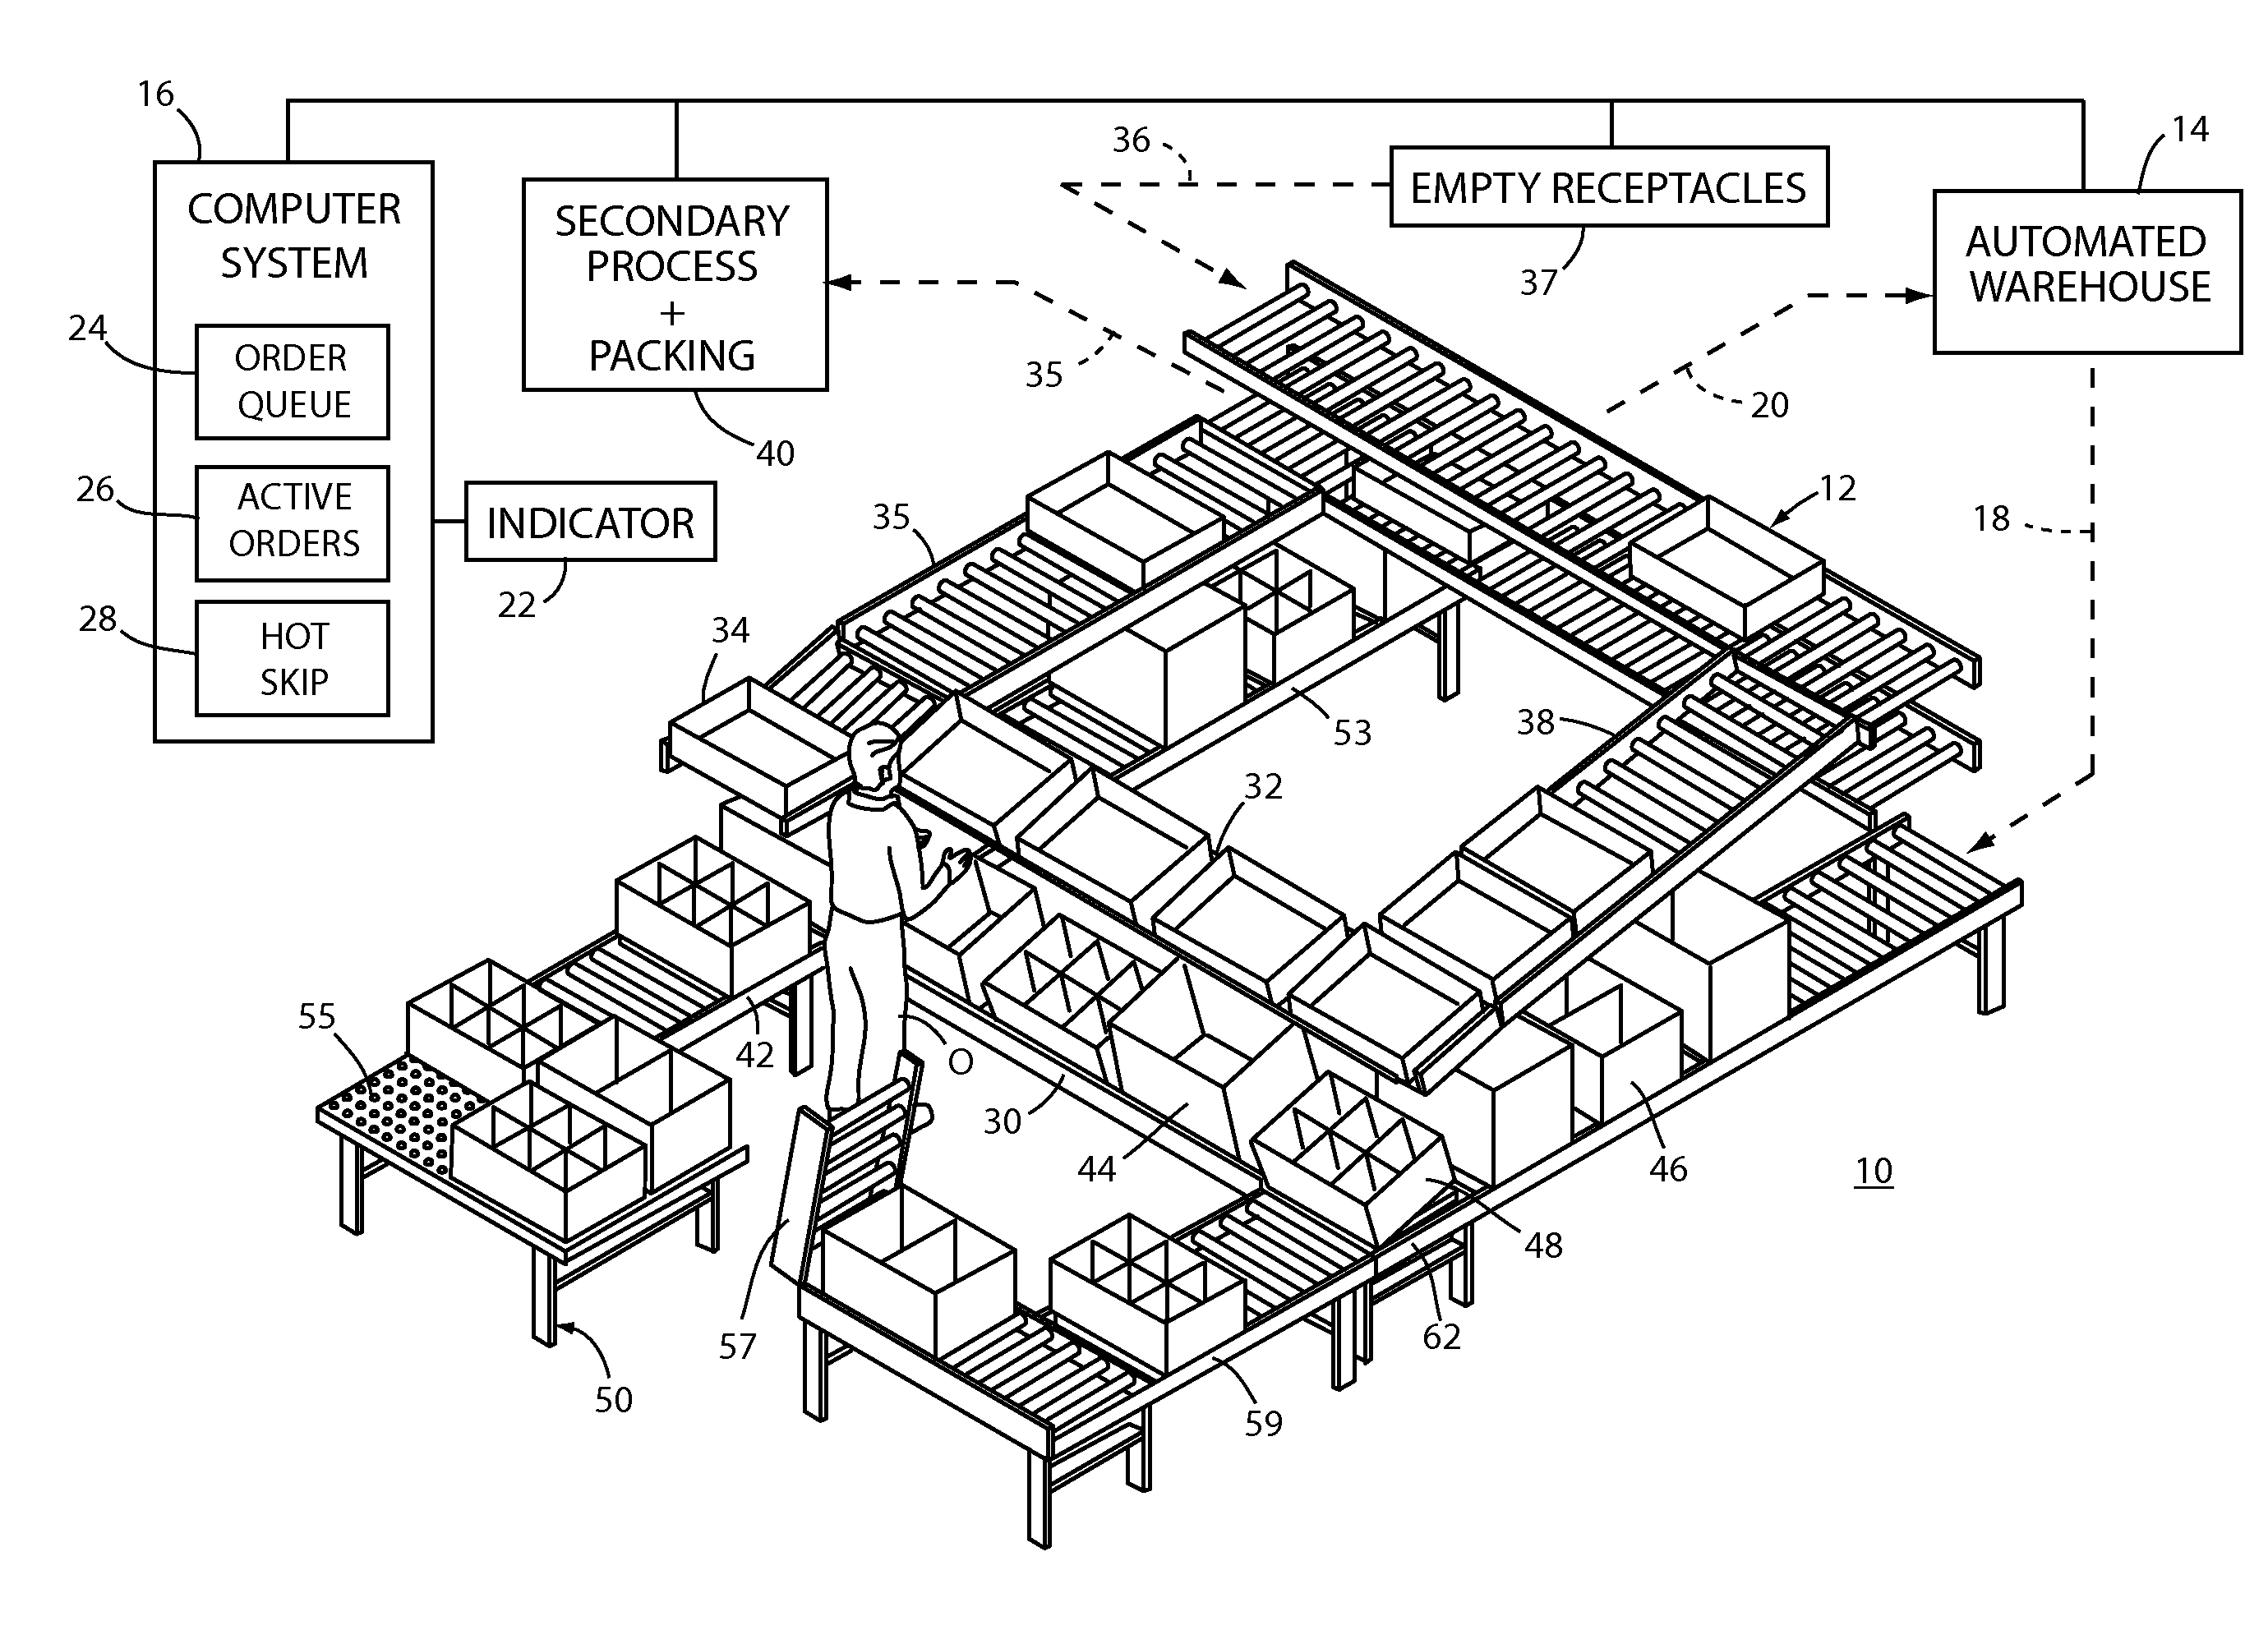 Picking station with automated warehouse